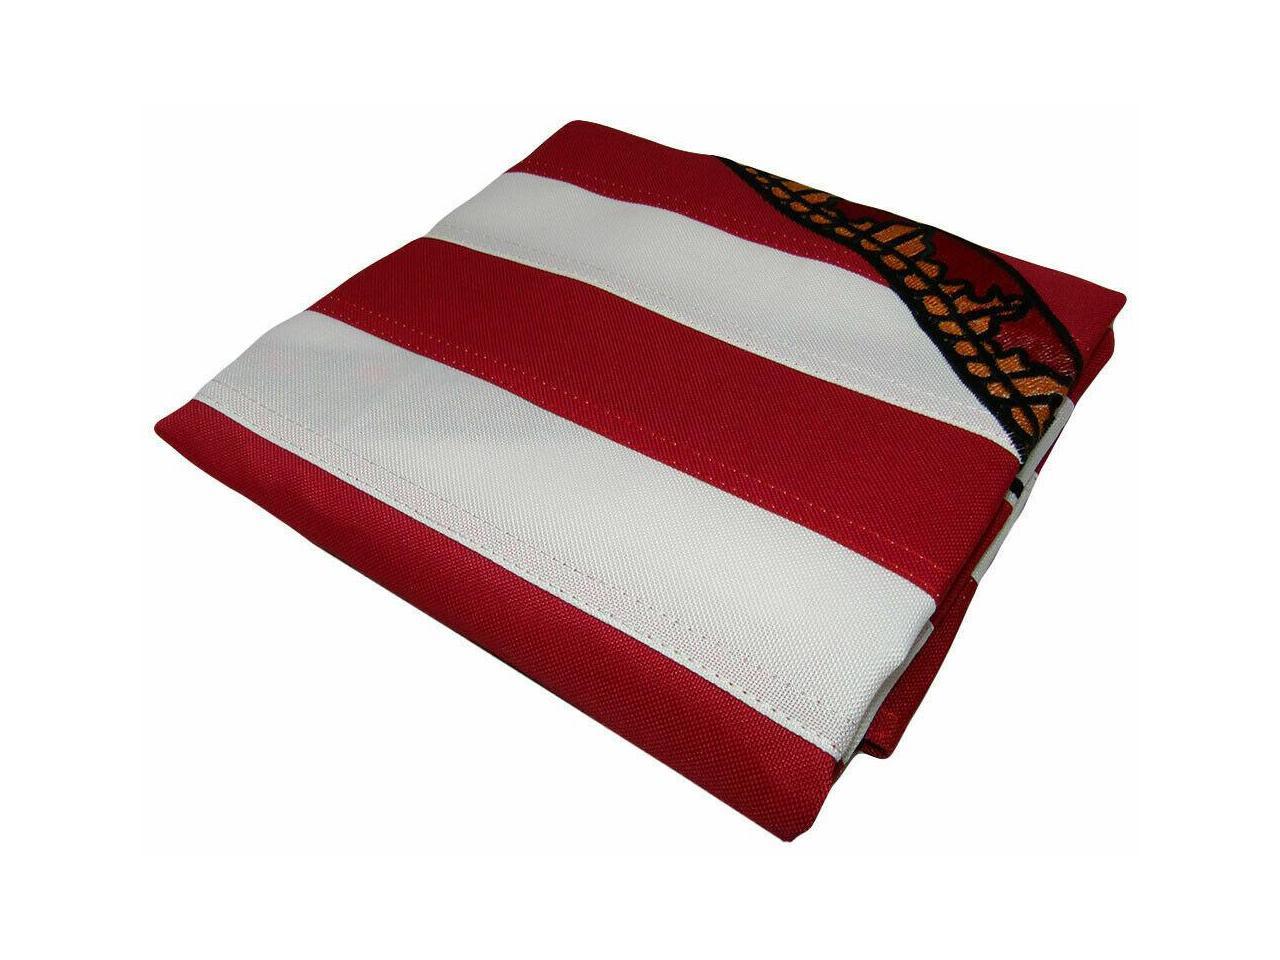 2x3 Embroidered 1st First Navy Jack Heavy Duty 600D 2 Ply Nylon Flag 2'x3' 